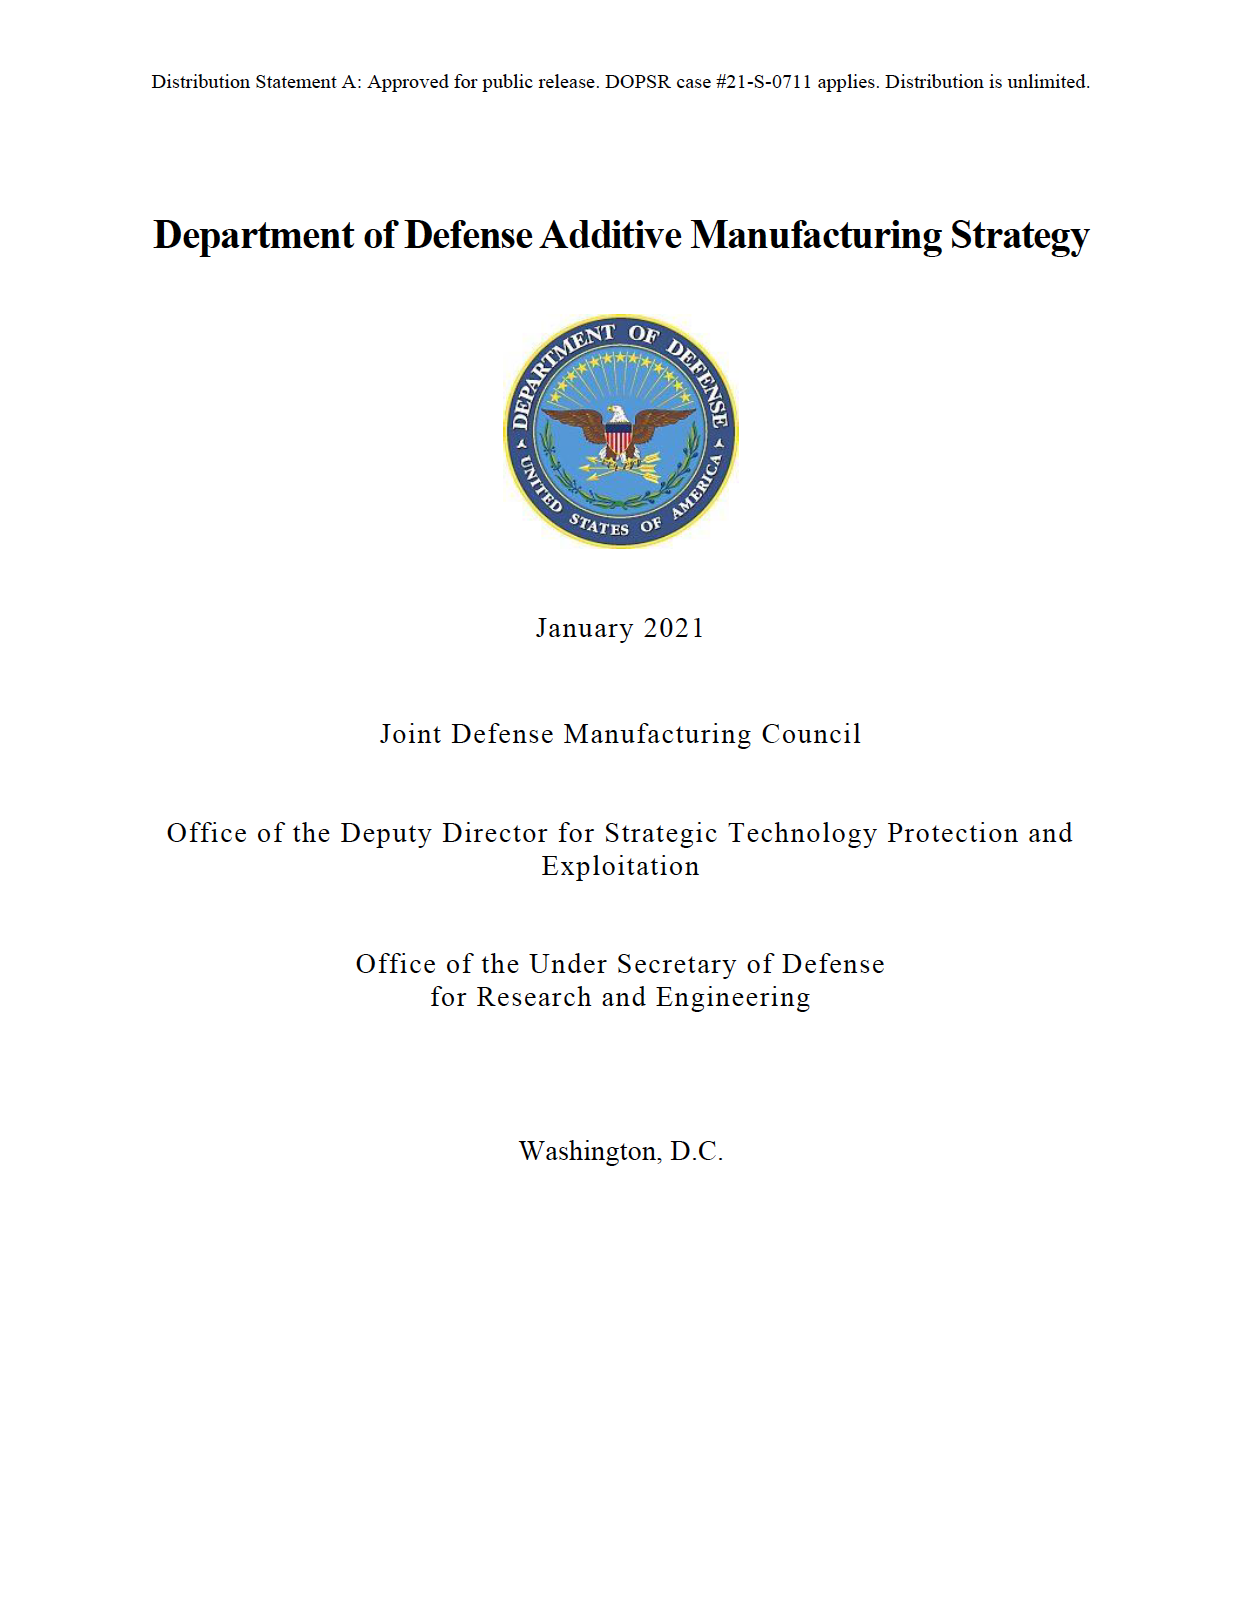 U.S. Department of Defense Additive Manufacturing Strategy